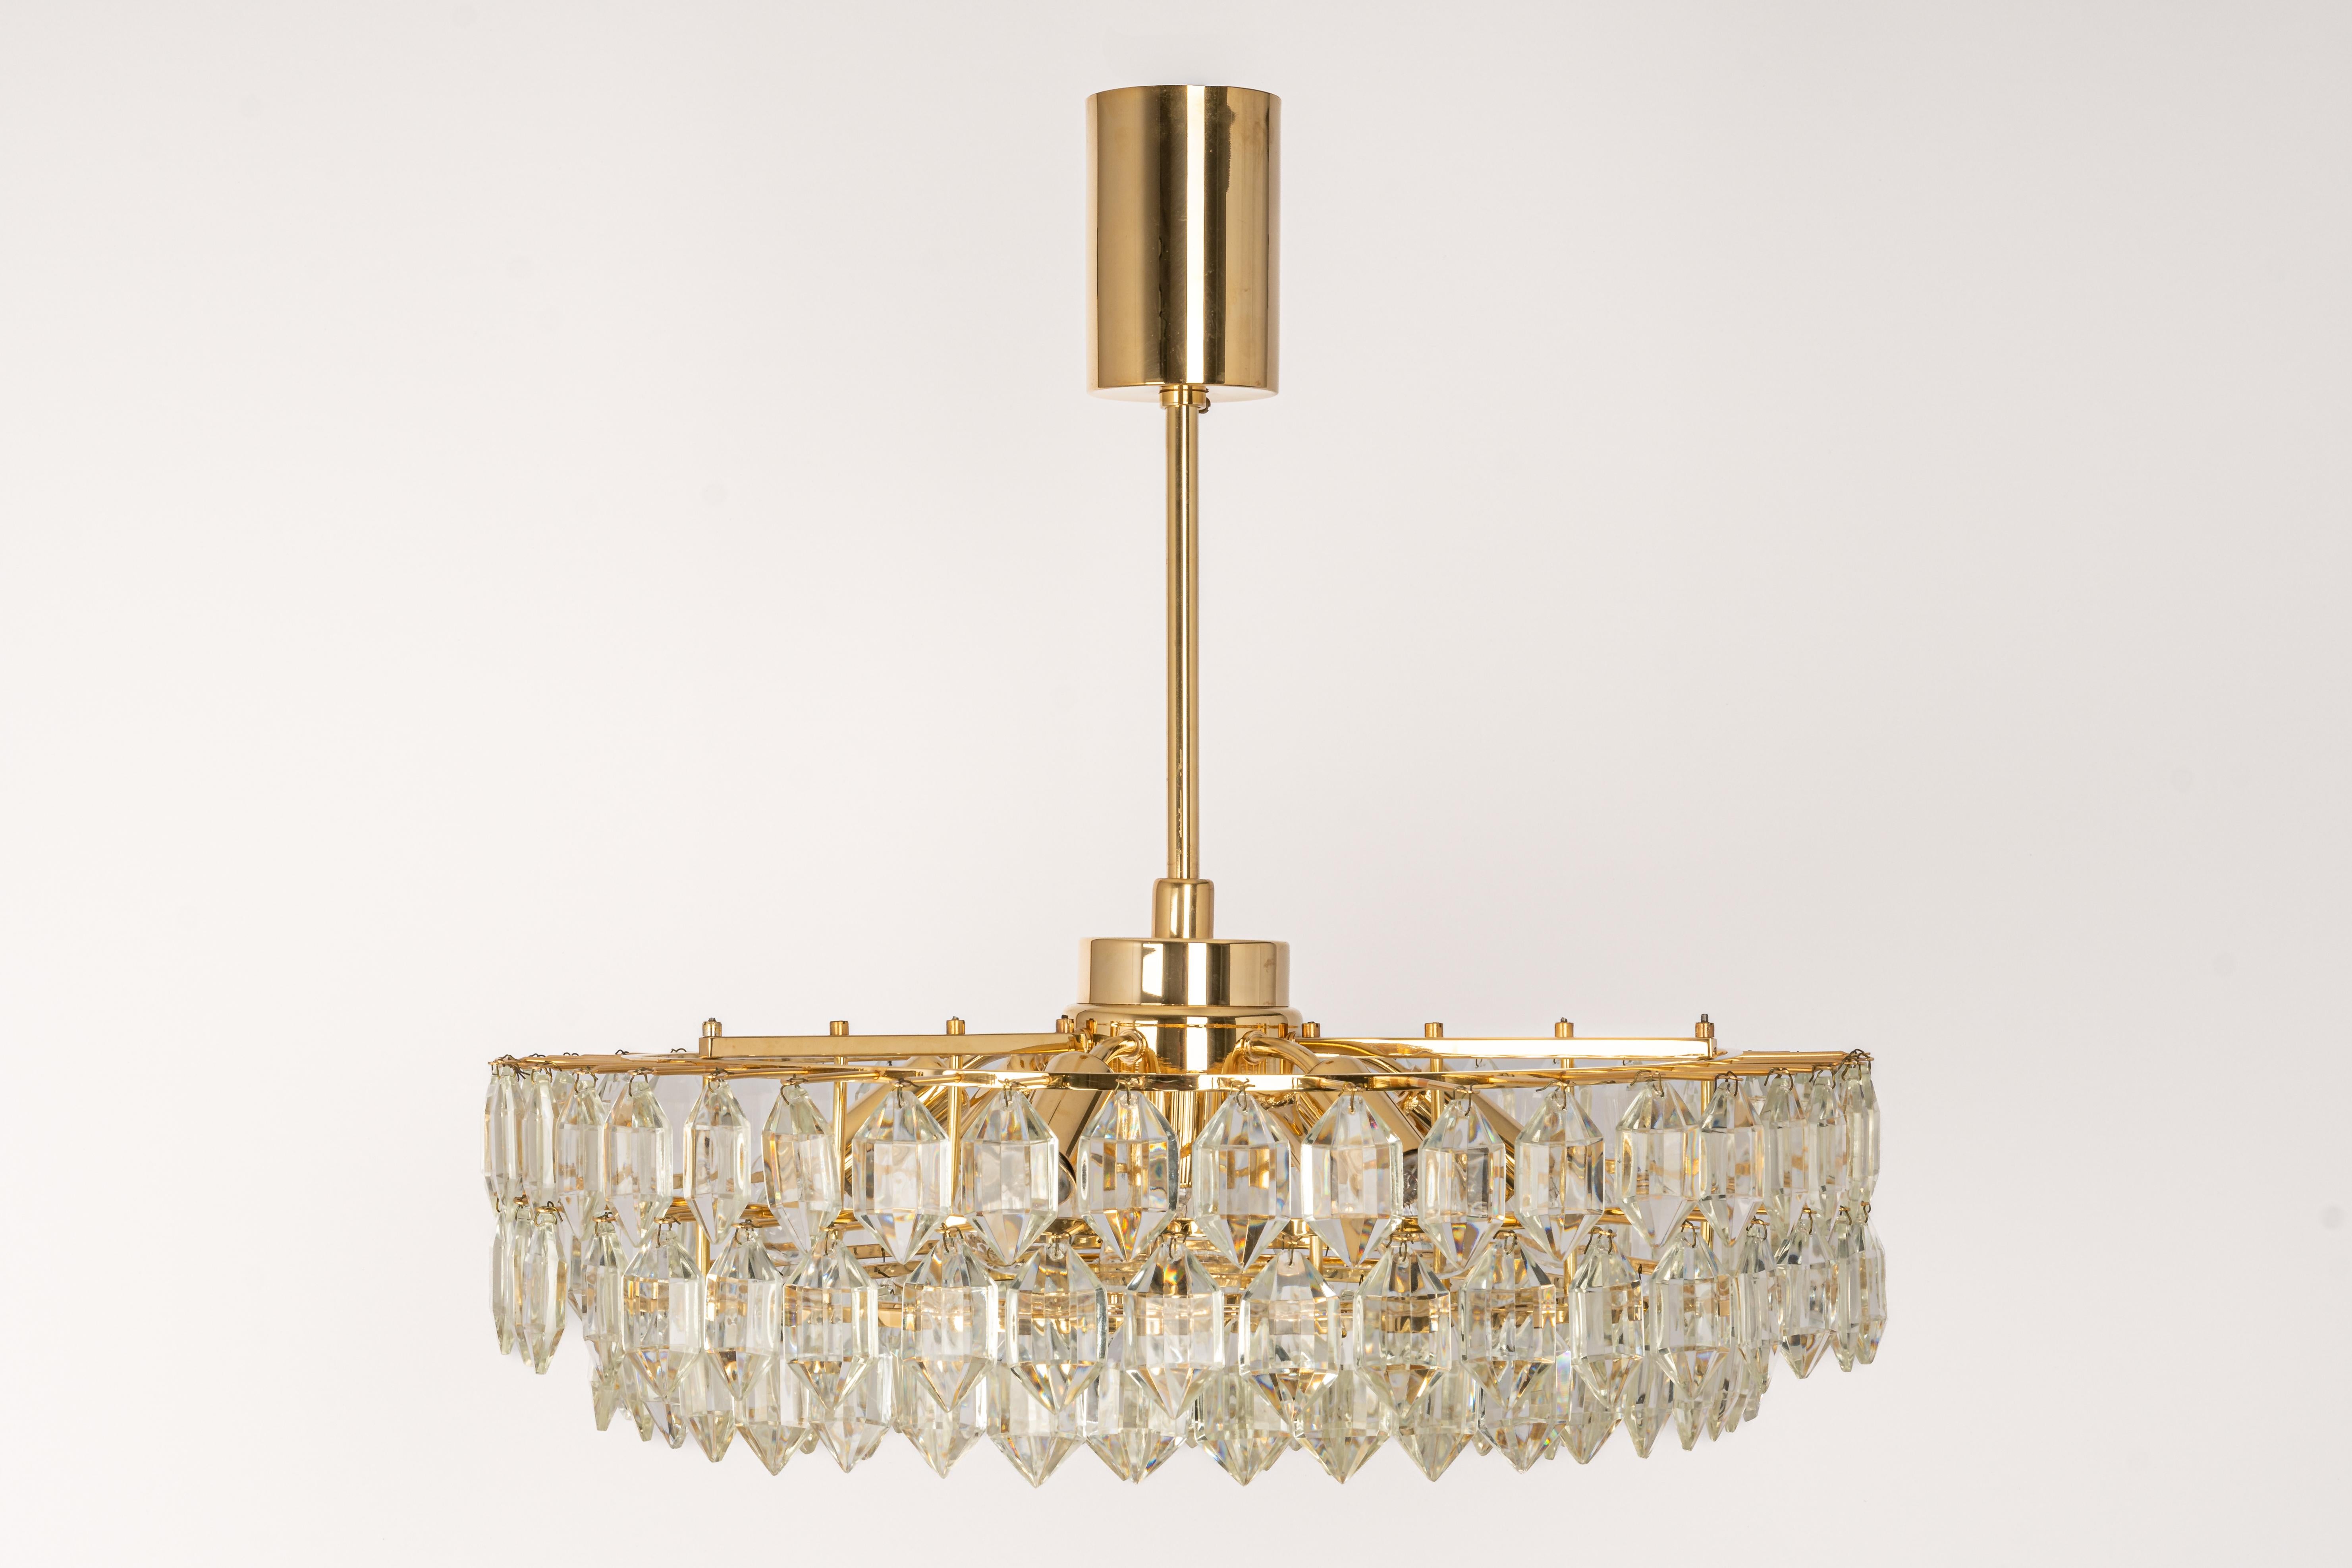 A stunning six-tier chandelier by Bakalowits & Sohne, Austria, manufactured in circa 1960-1969. A handmade and high-quality piece. The ceiling fixture and the frame are made of gilt brass and have five rings with lots of facetted crystal glass